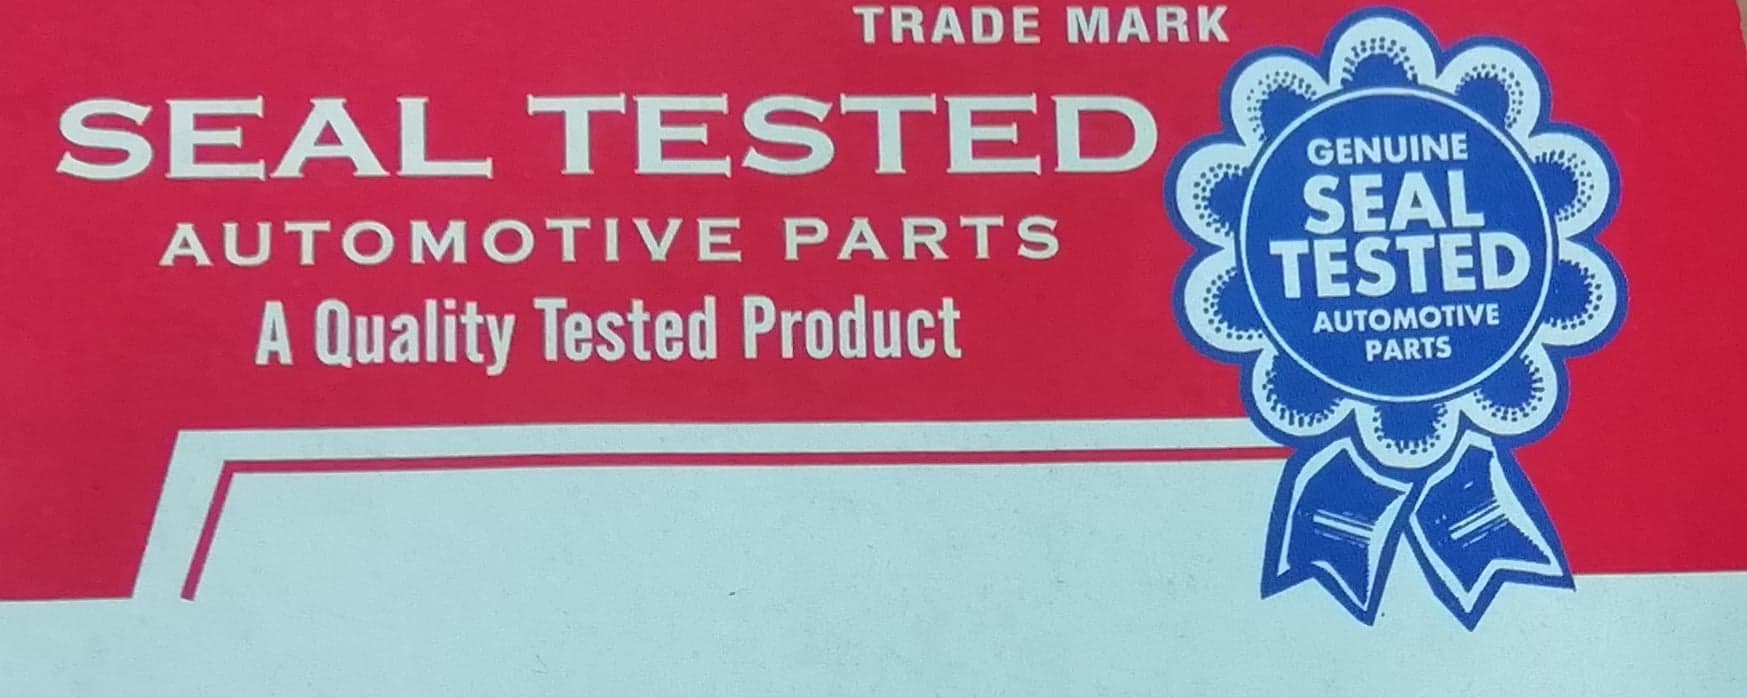 seal tested automotive parts